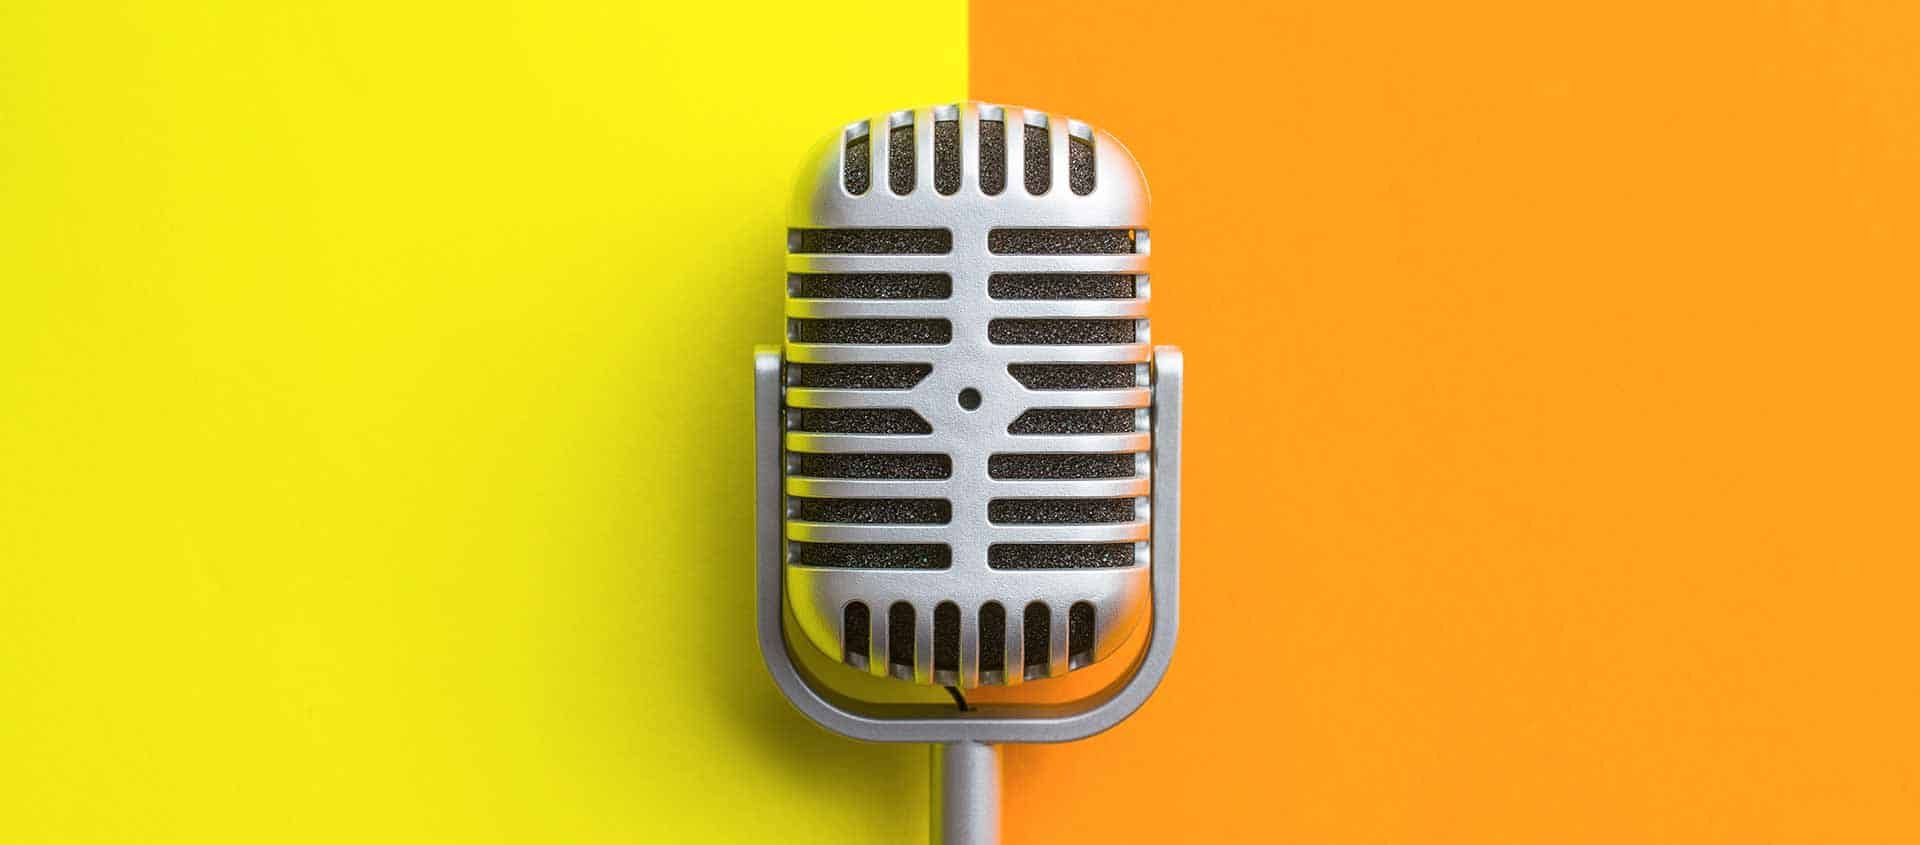 microphone on a yellow and orange background